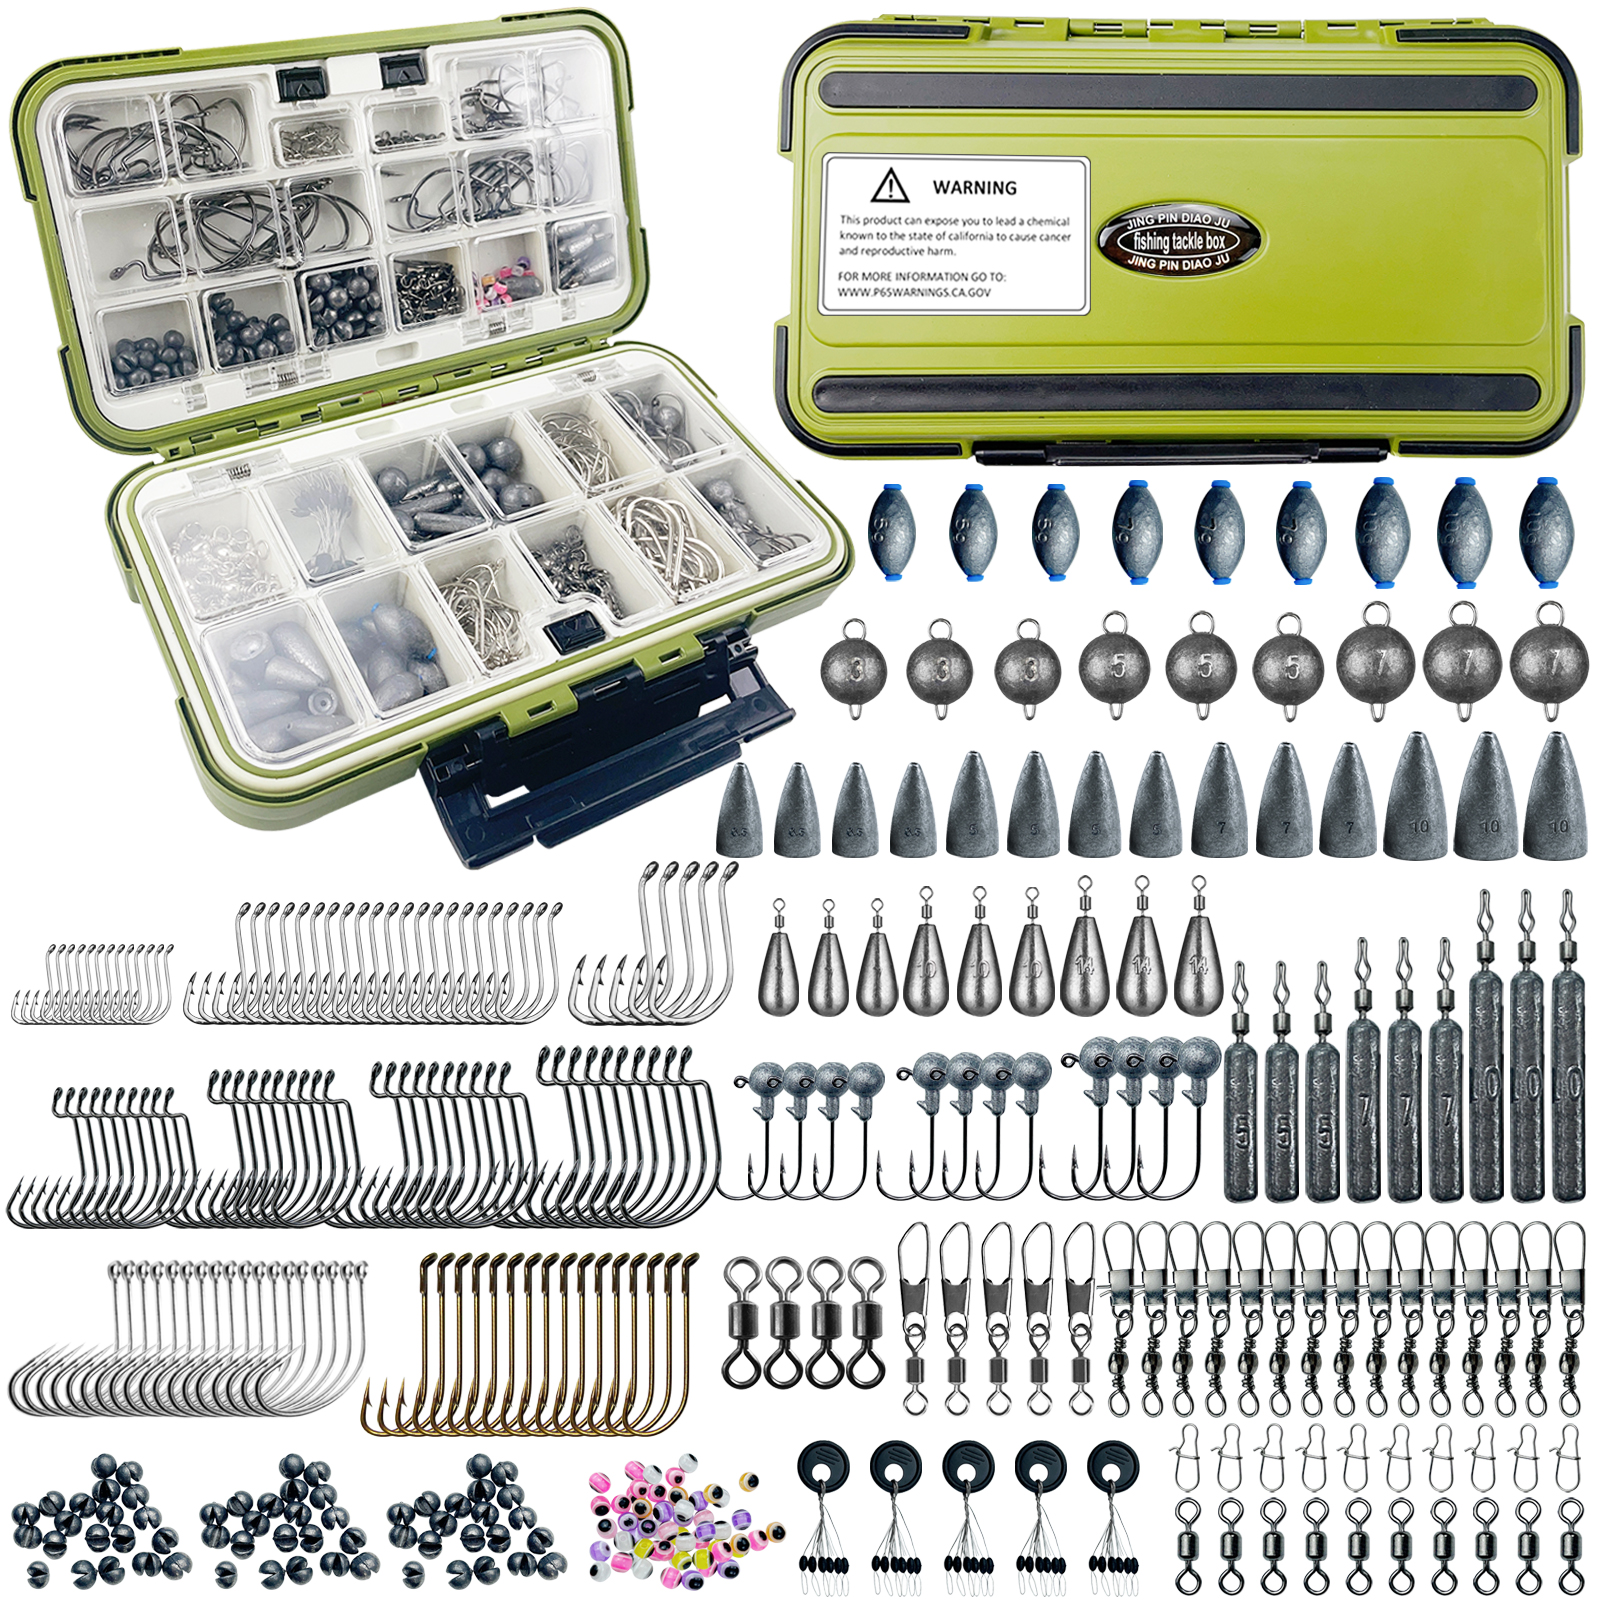 FREE FISHER 306pcs Fishing Weights Set Mixed Lead Sinkers Crank Jig Hooks Bait Lure Acceccories Swivels Snaps Beads with Multigrid Box for Freshwater/Saltwater